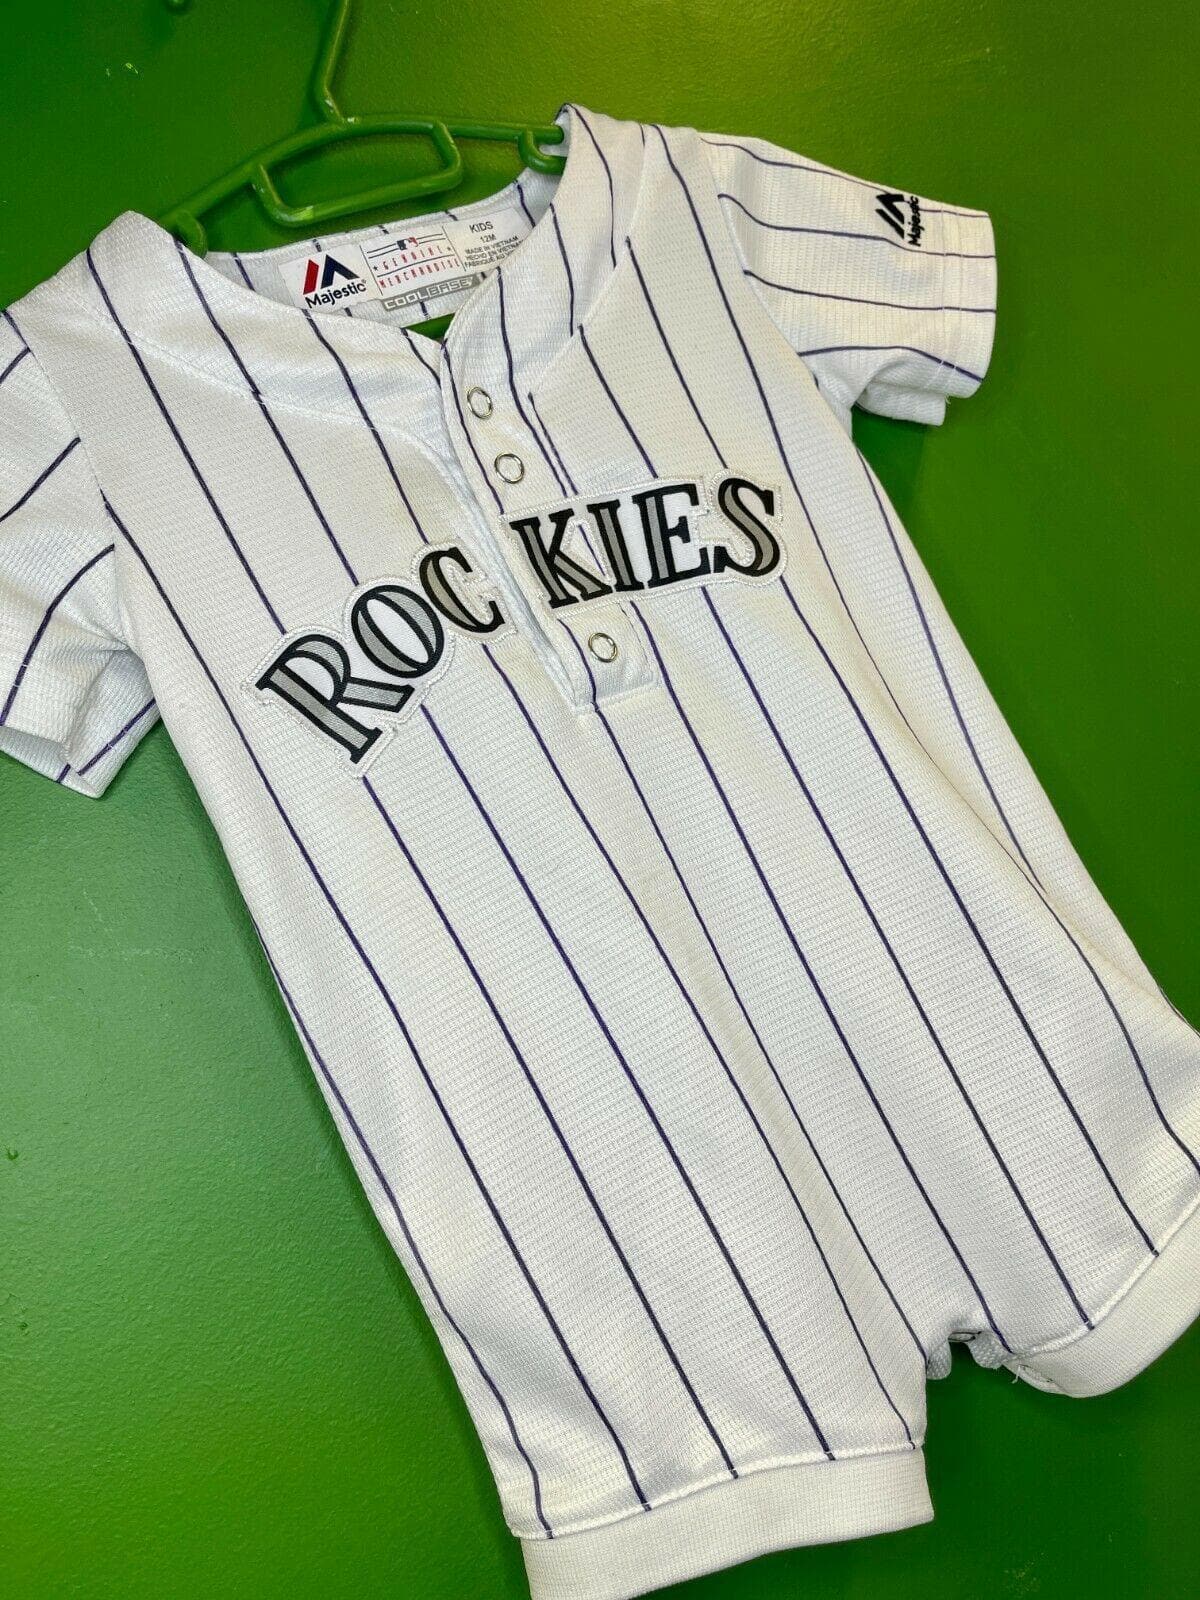 MLB Colorado Rockies Majestic Pin-Stripe Baby Outfit Toddler 12 months